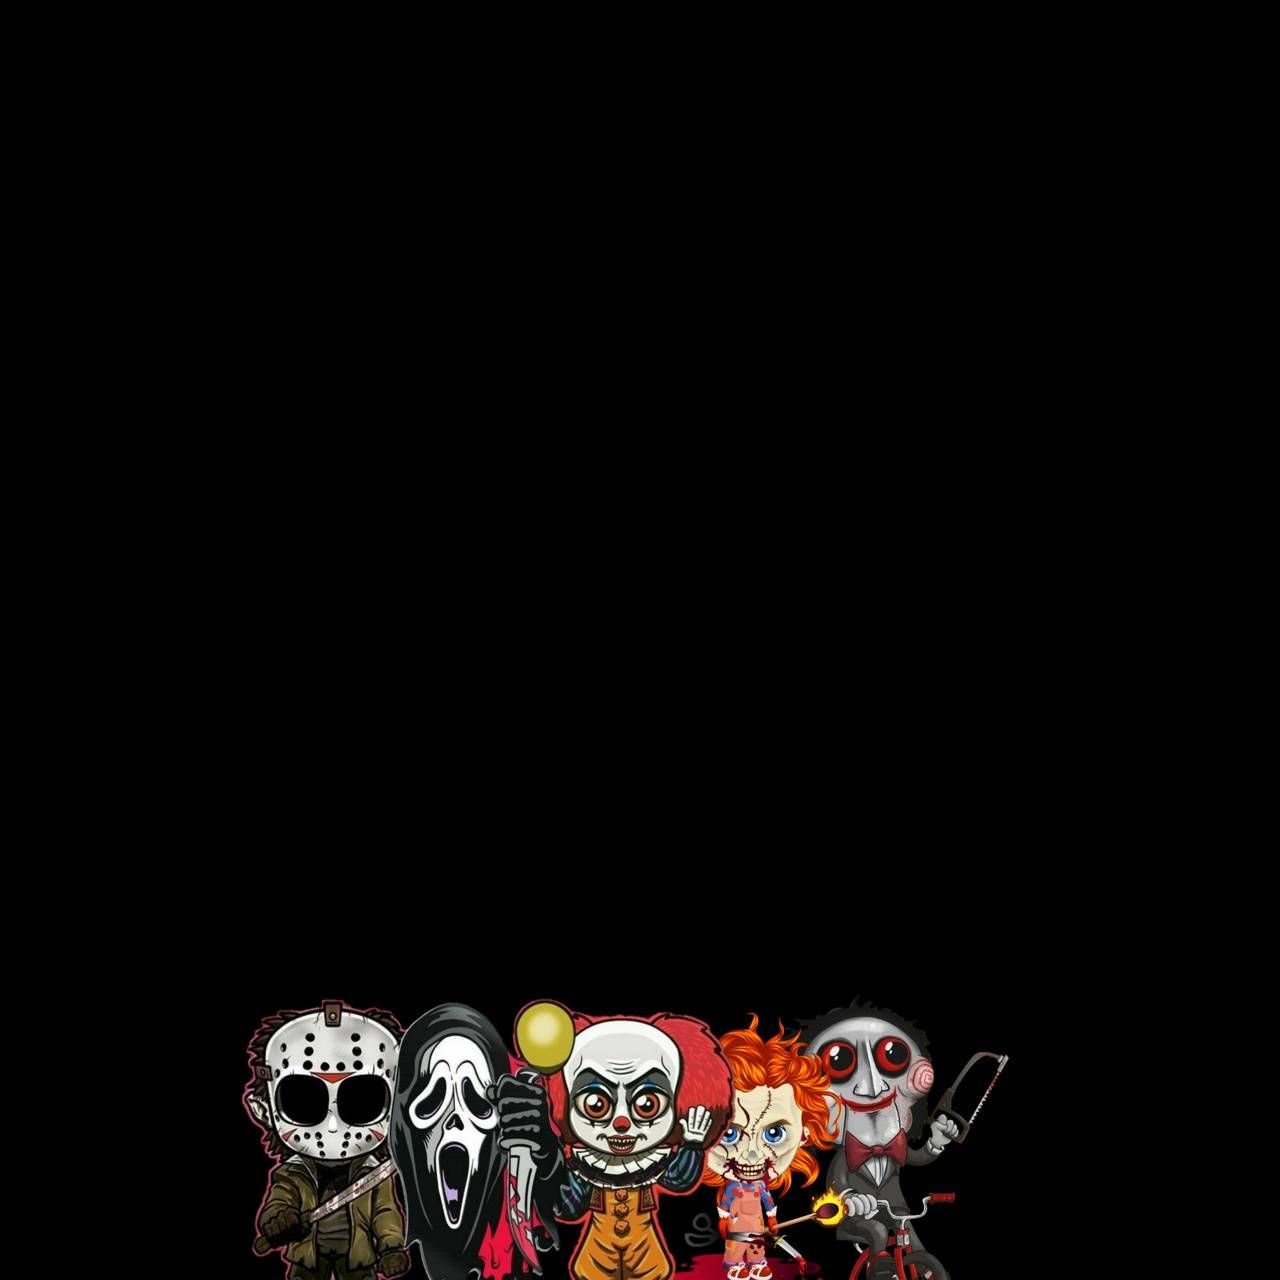 11075 Horror Movie Icons  Android iPhone Desktop HD Backgrounds   Wallpapers 1080p 4k HD Wallpapers Desktop Background  Android   iPhone 1080p 4k 1080x1678 2023